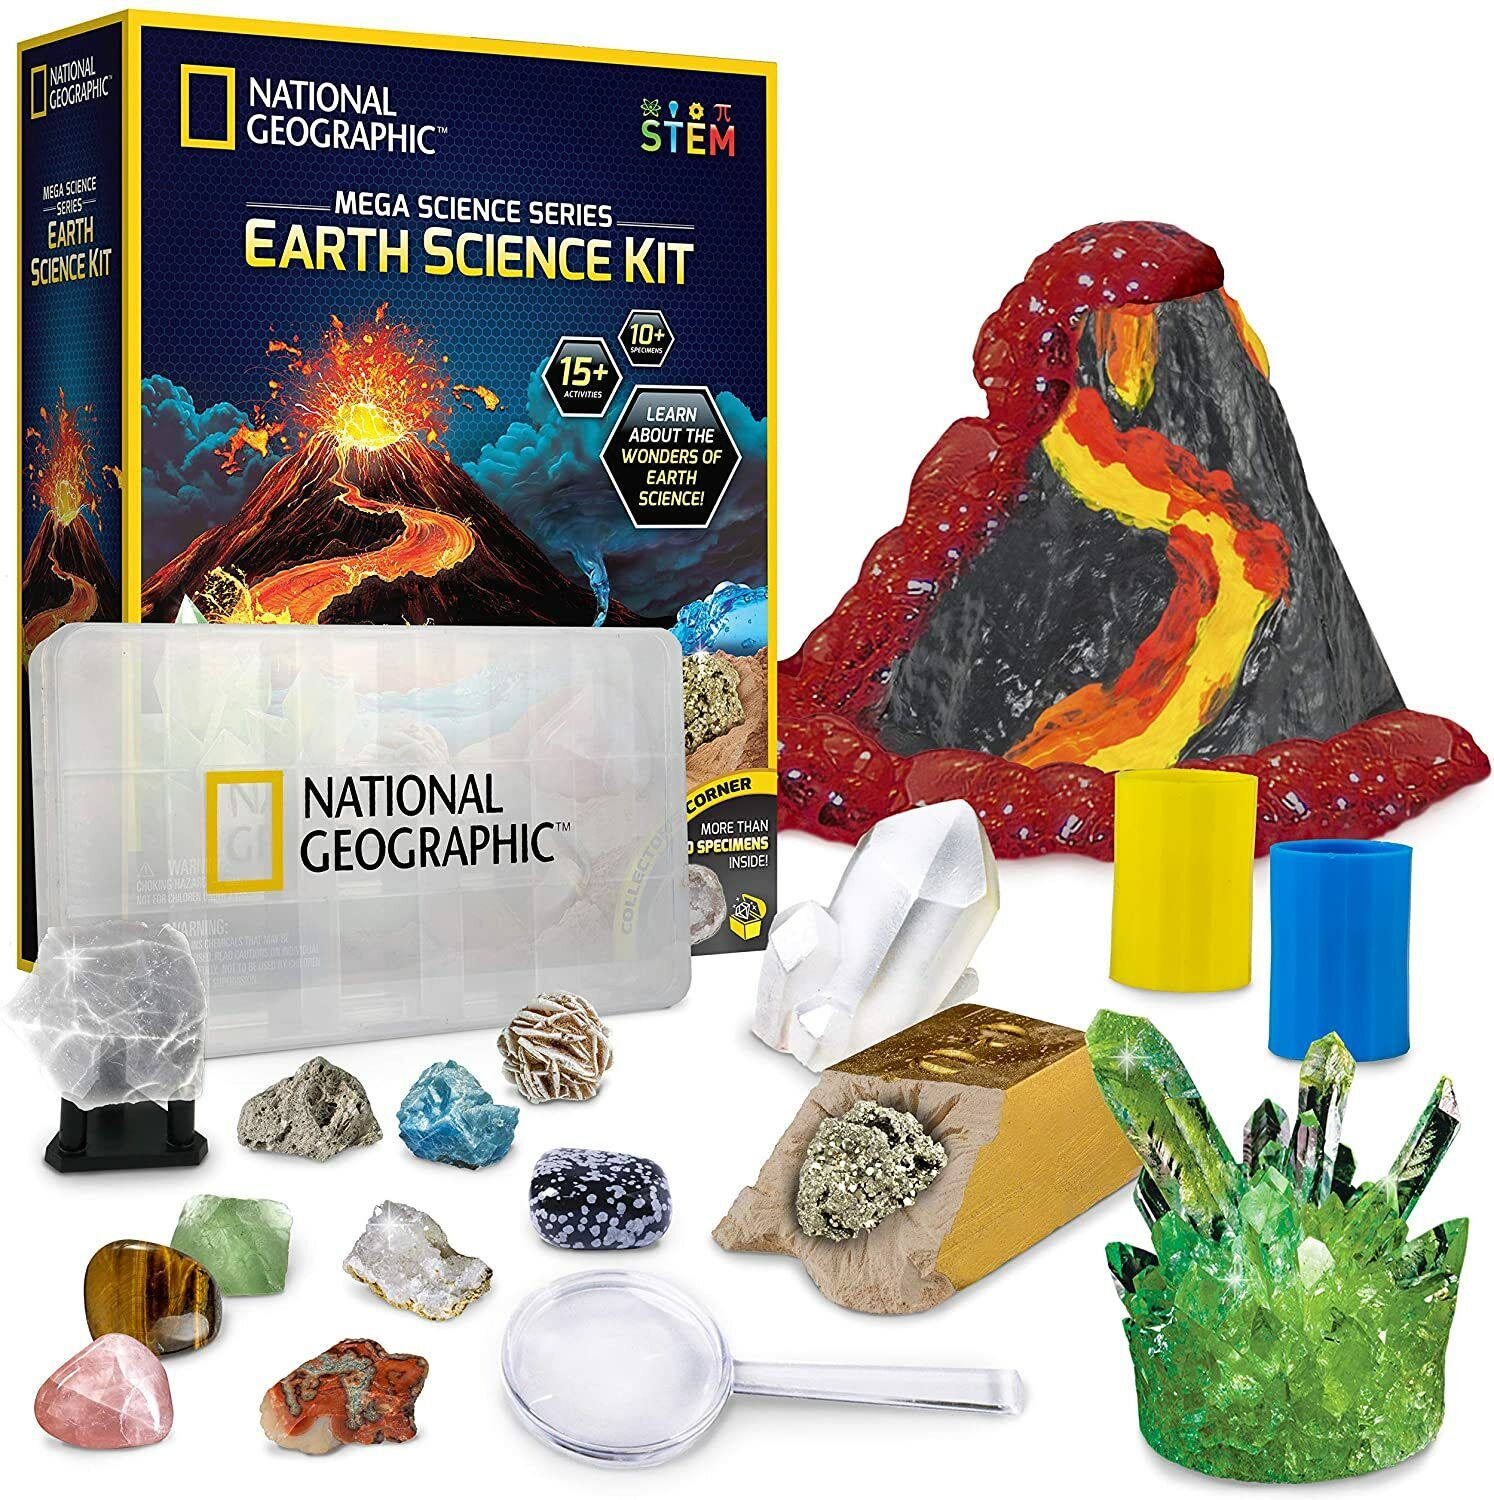 NATIONAL GEOGRAPHIC Earth Science Kit - Over 15 Science Experiments